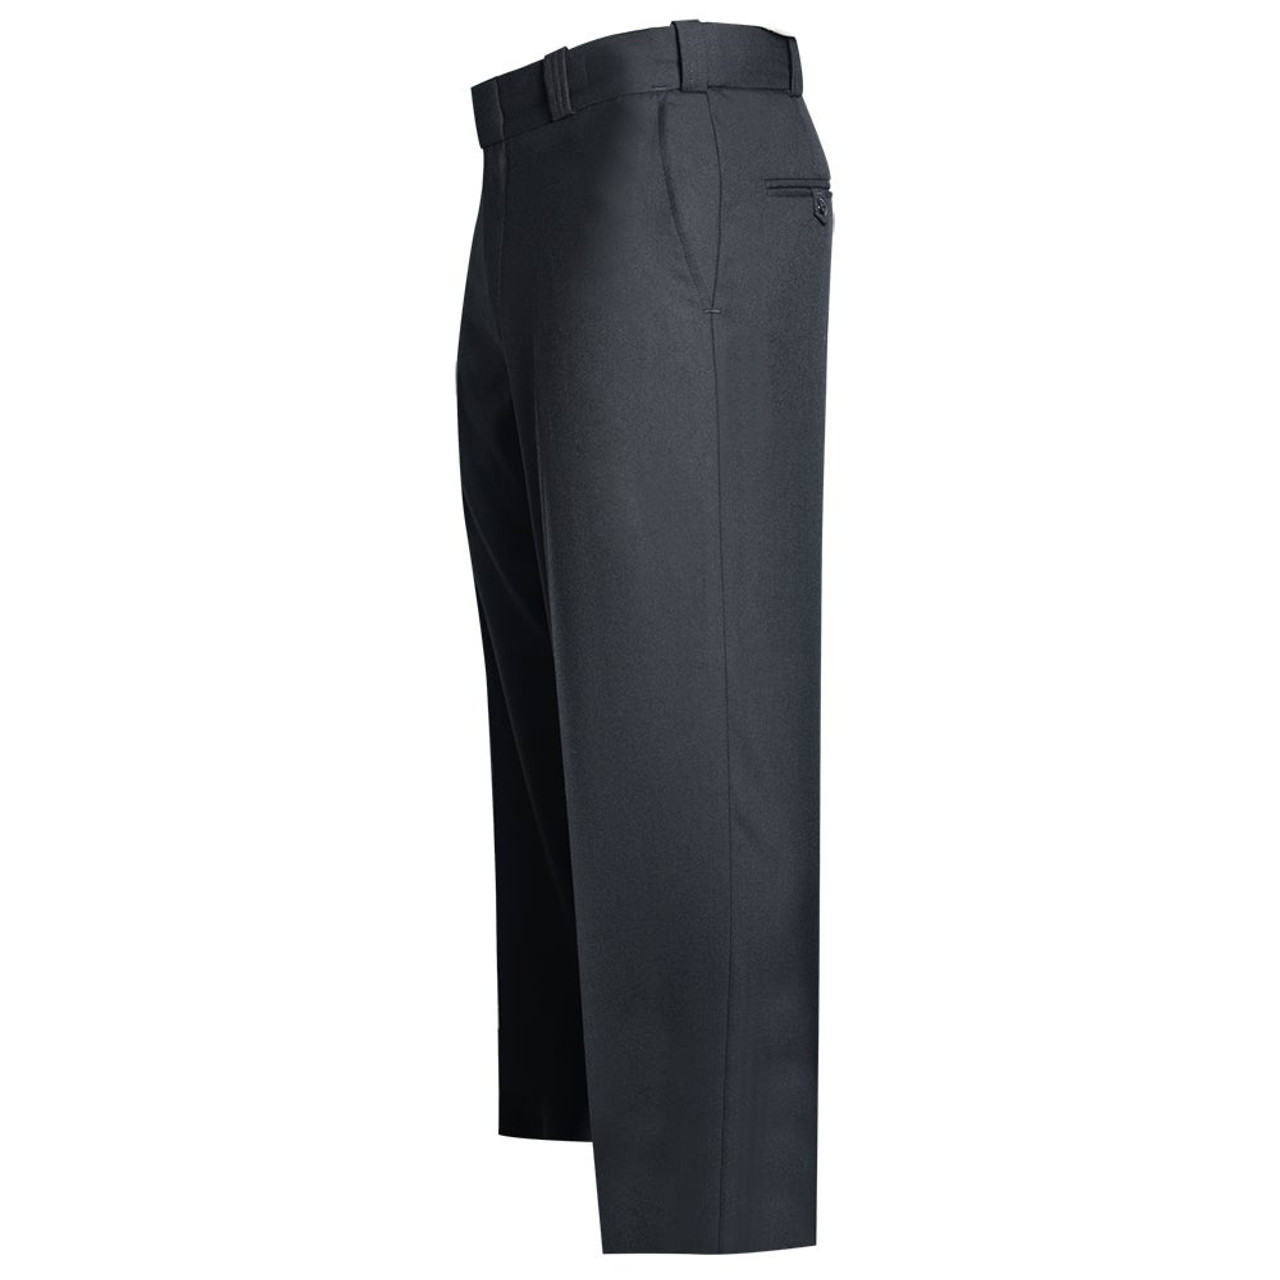 Cargo Trousers Black Polyester 240gsm | BK Safetywear